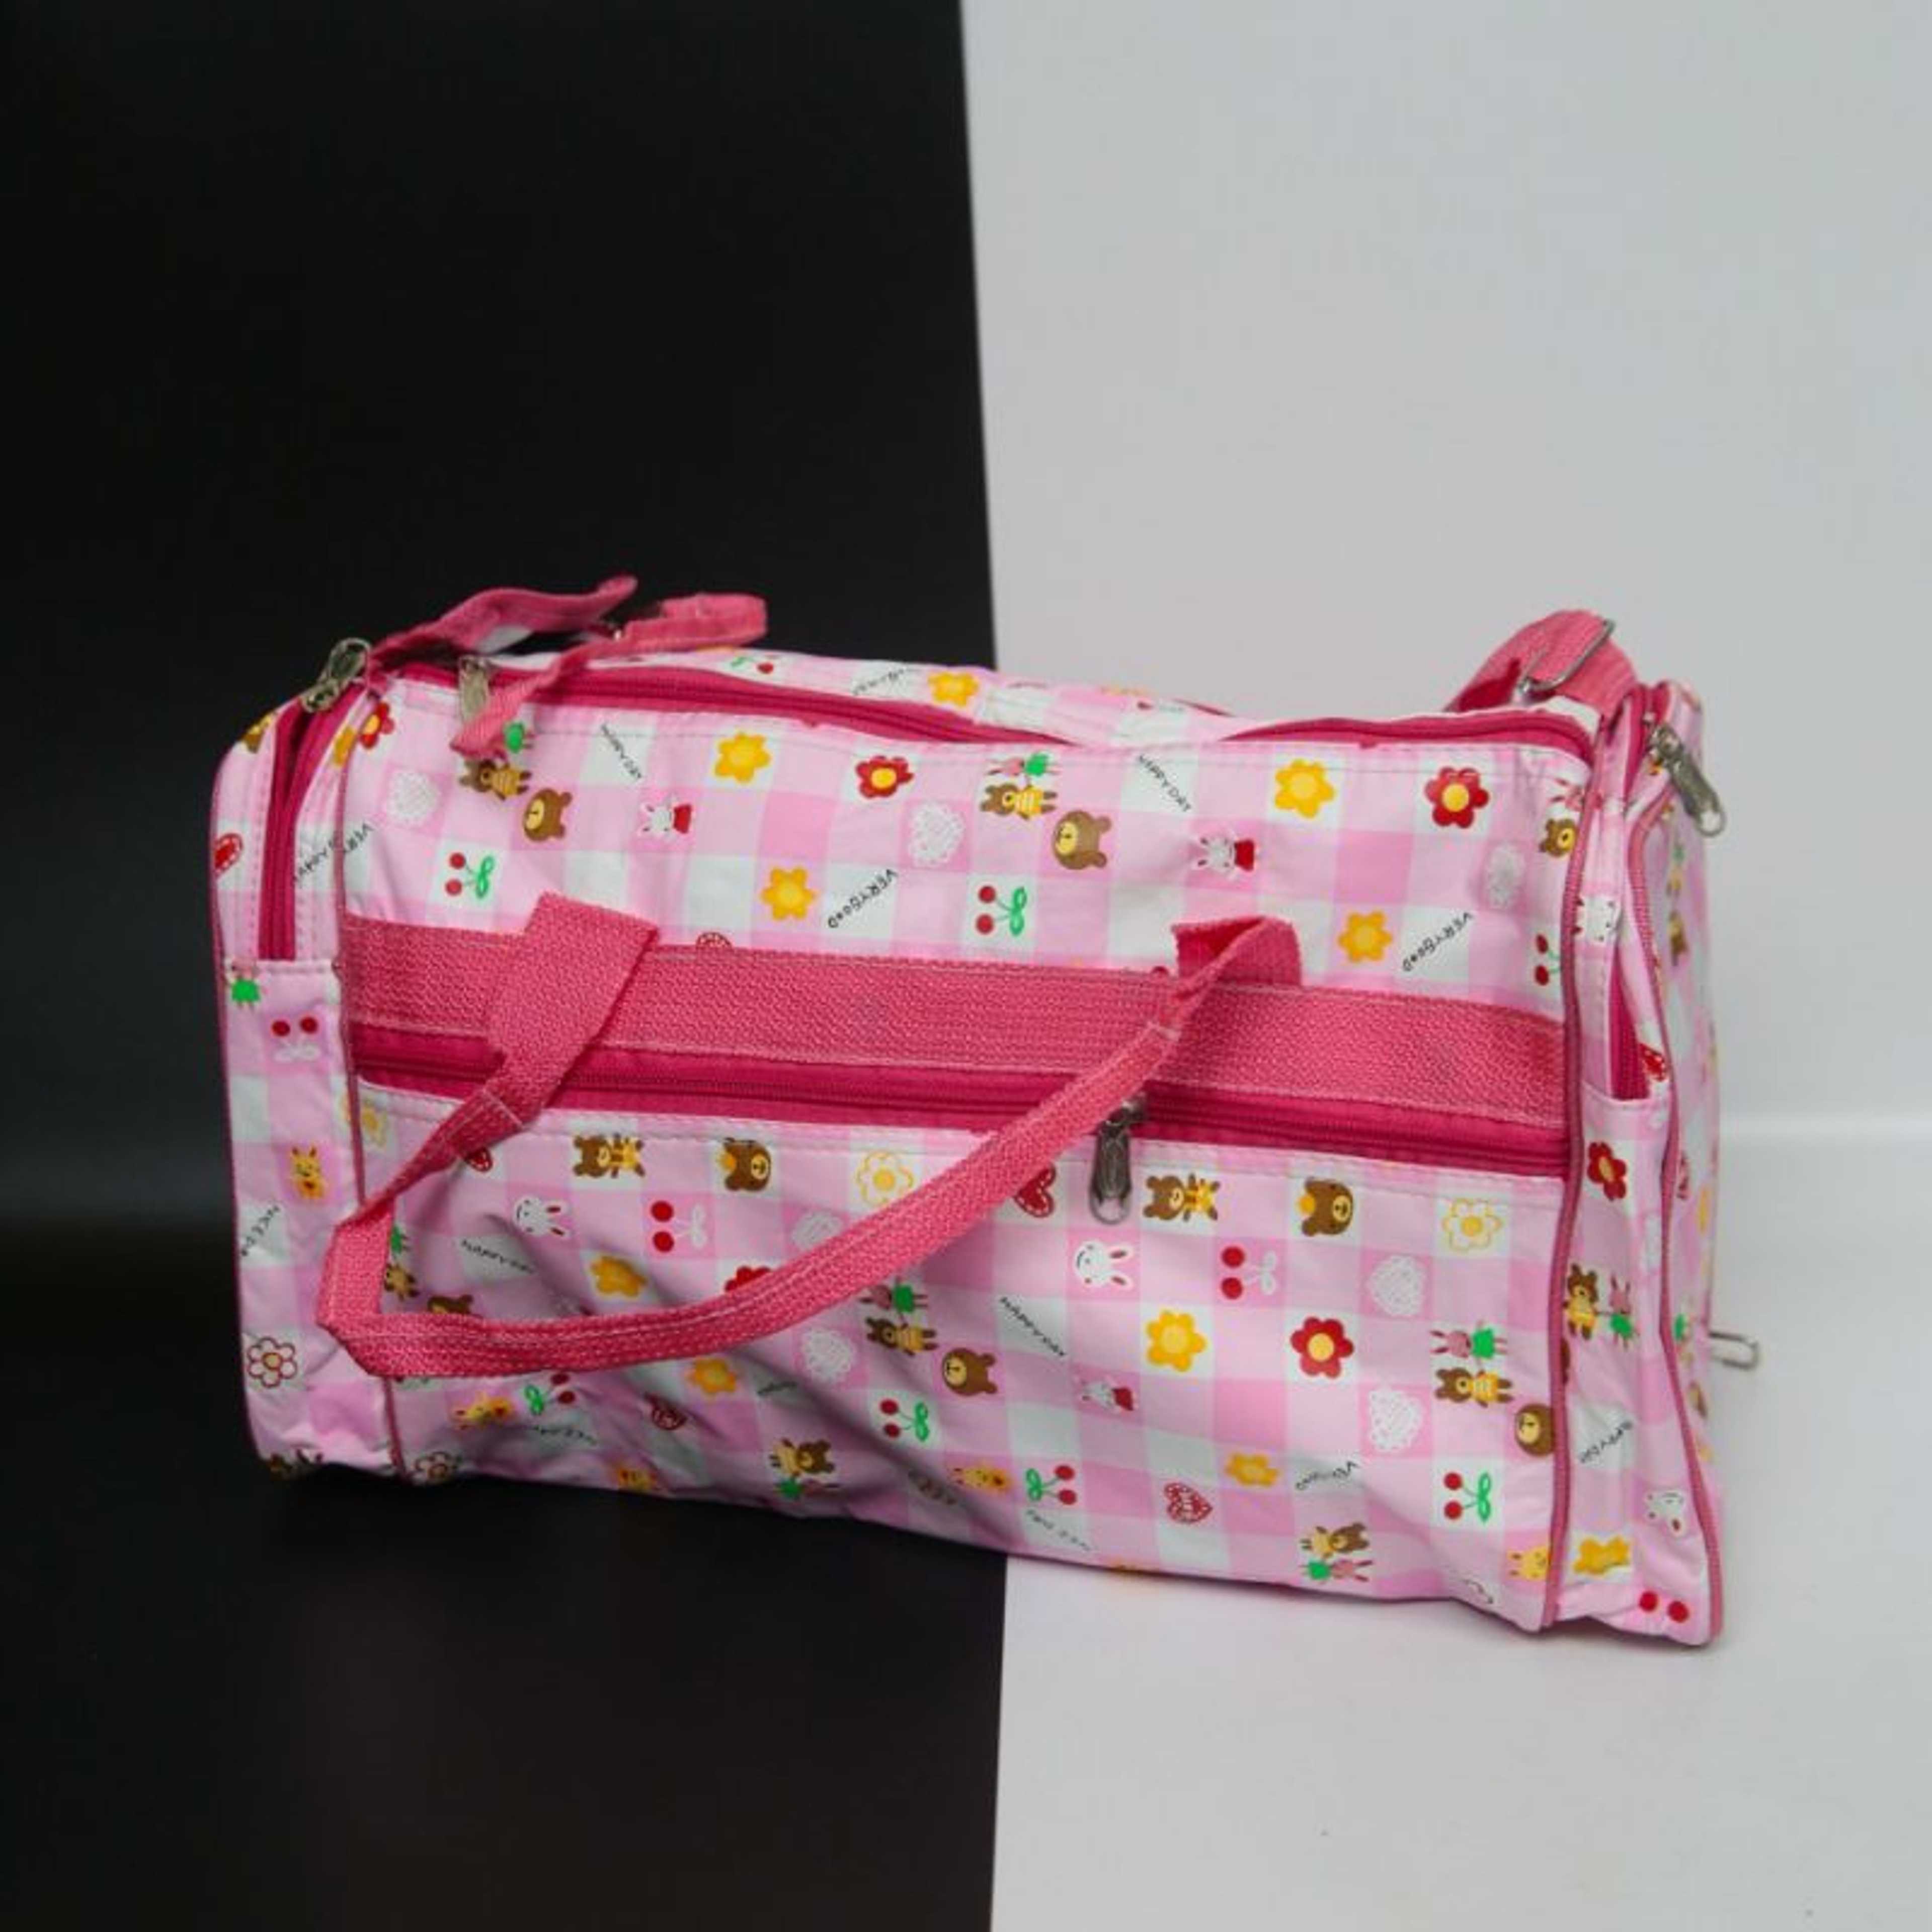 BABY BAG WITH FEEDER CASE PINK